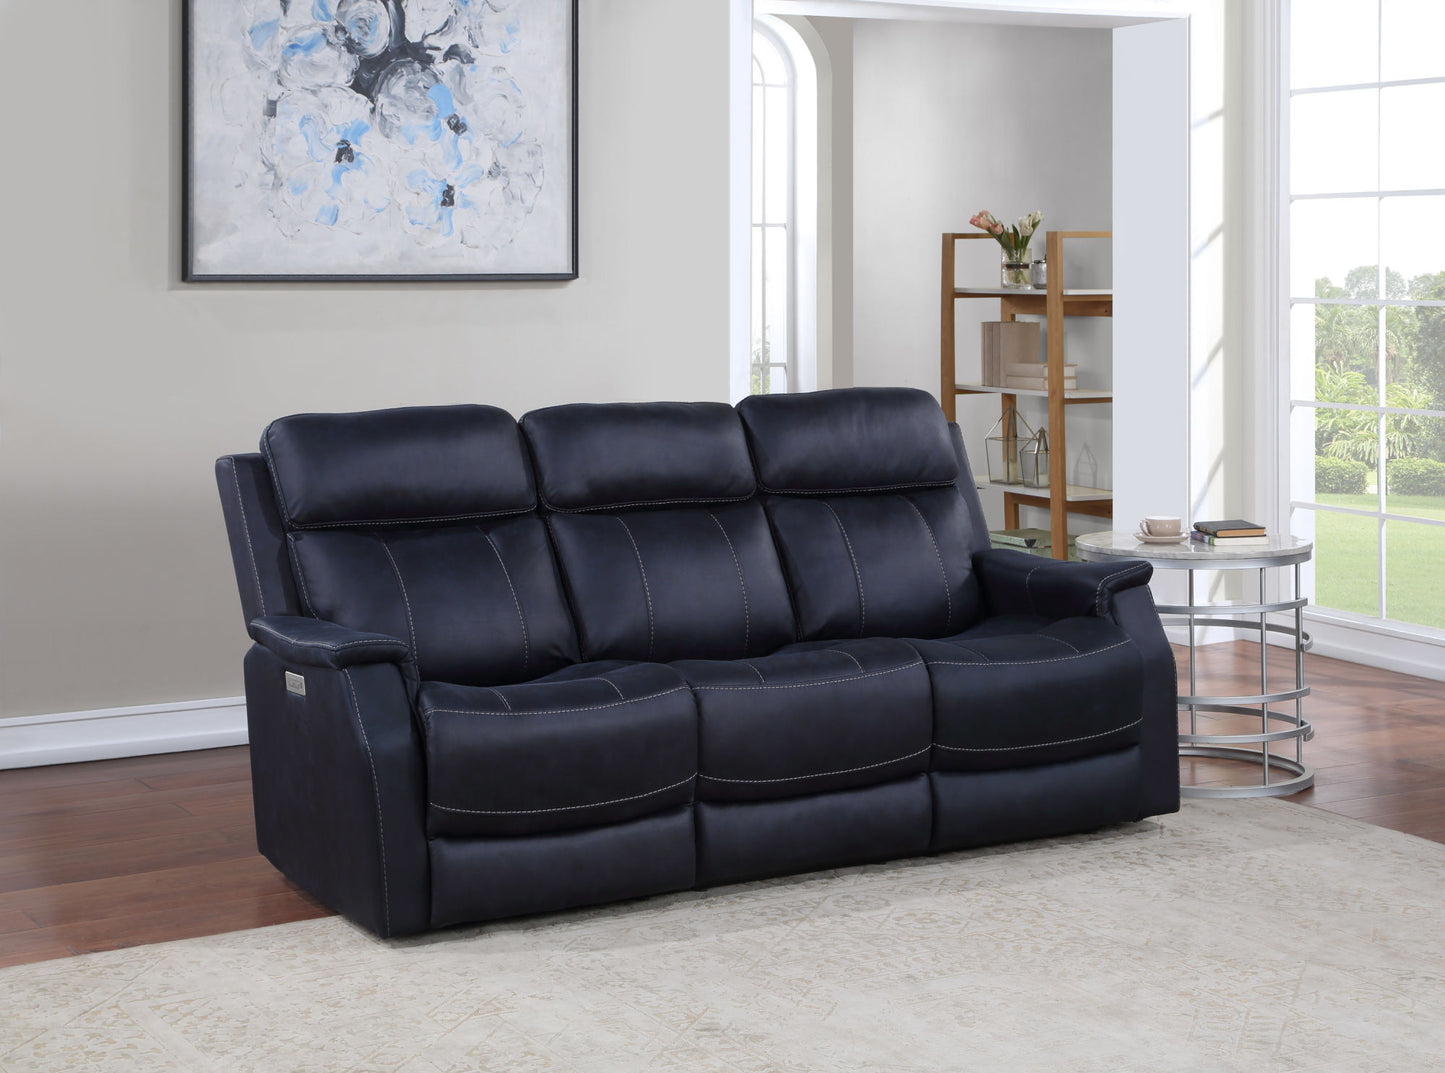 Tailored Dual-Power Reclining Sofa - Nubuck Leather-Like Cover, Power Headrest, Power Footrest - Contemporary Design, Hand-Stitching Details